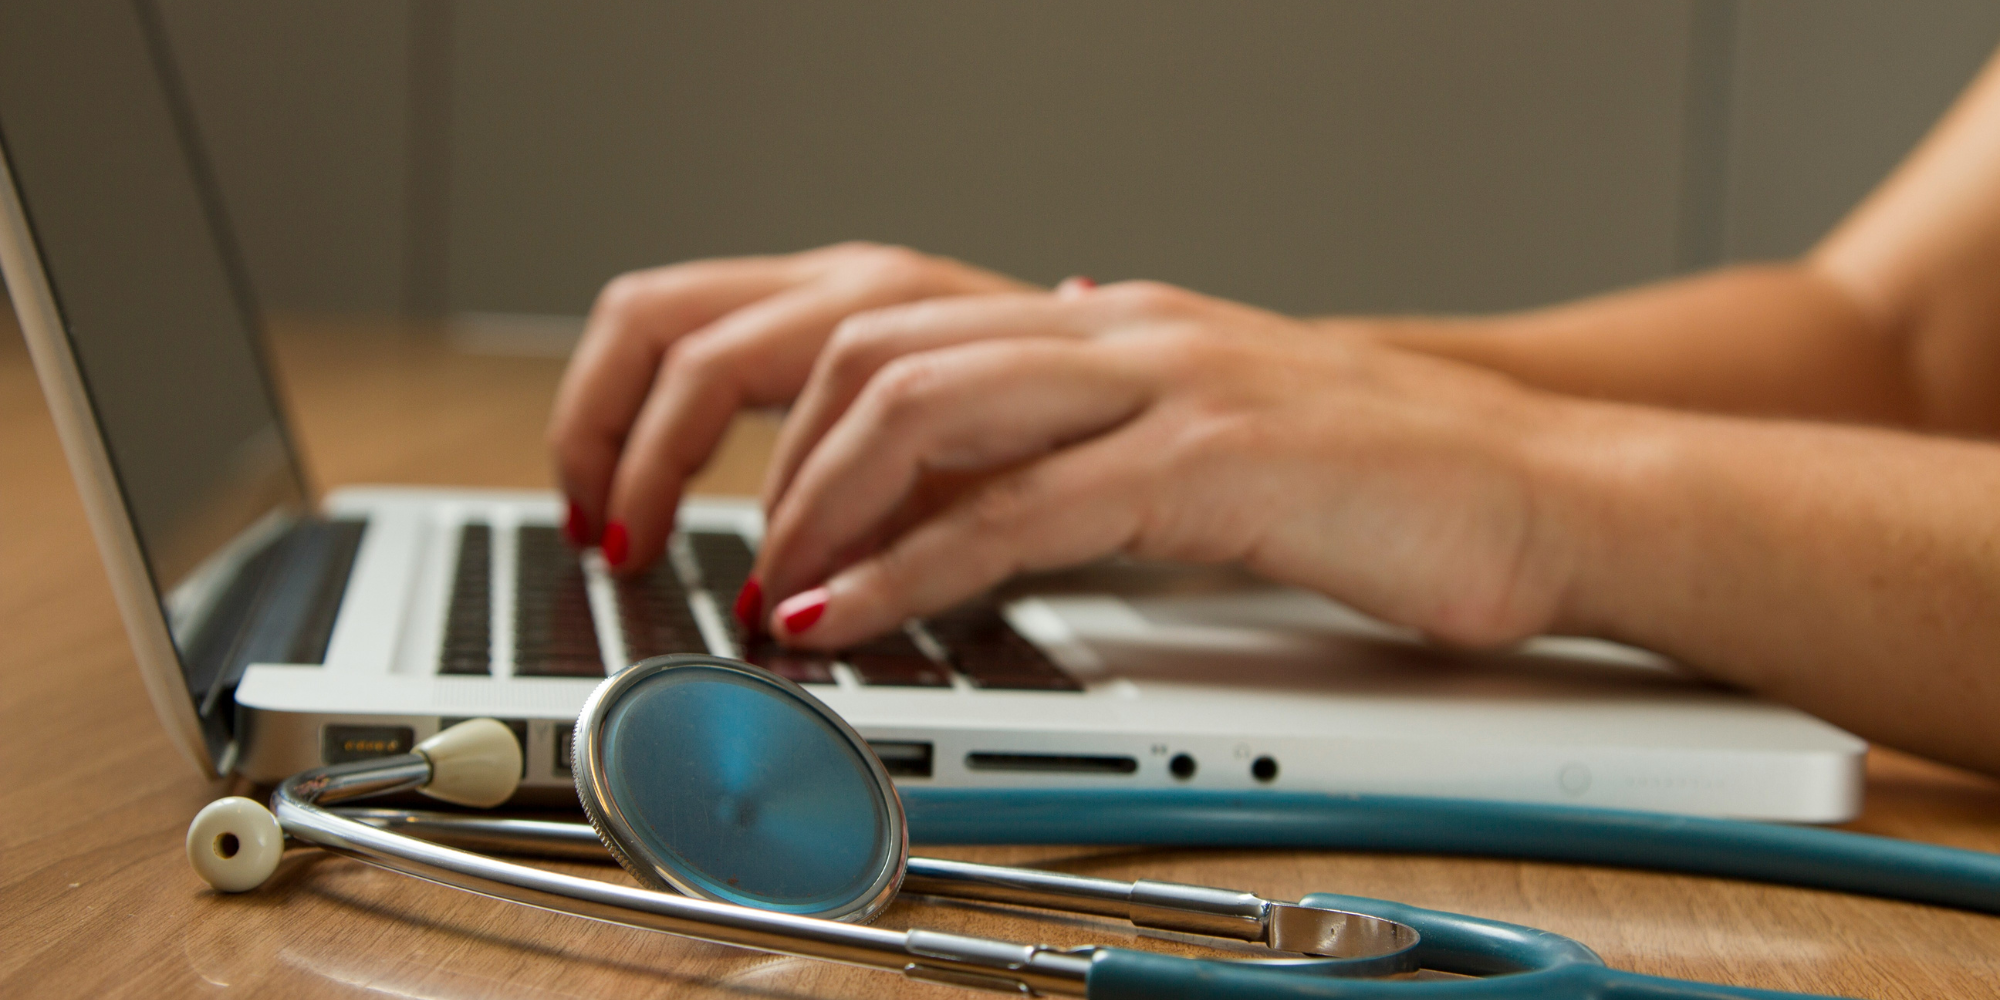 UK Private Healthcare: Who Has The Best Online Presence?